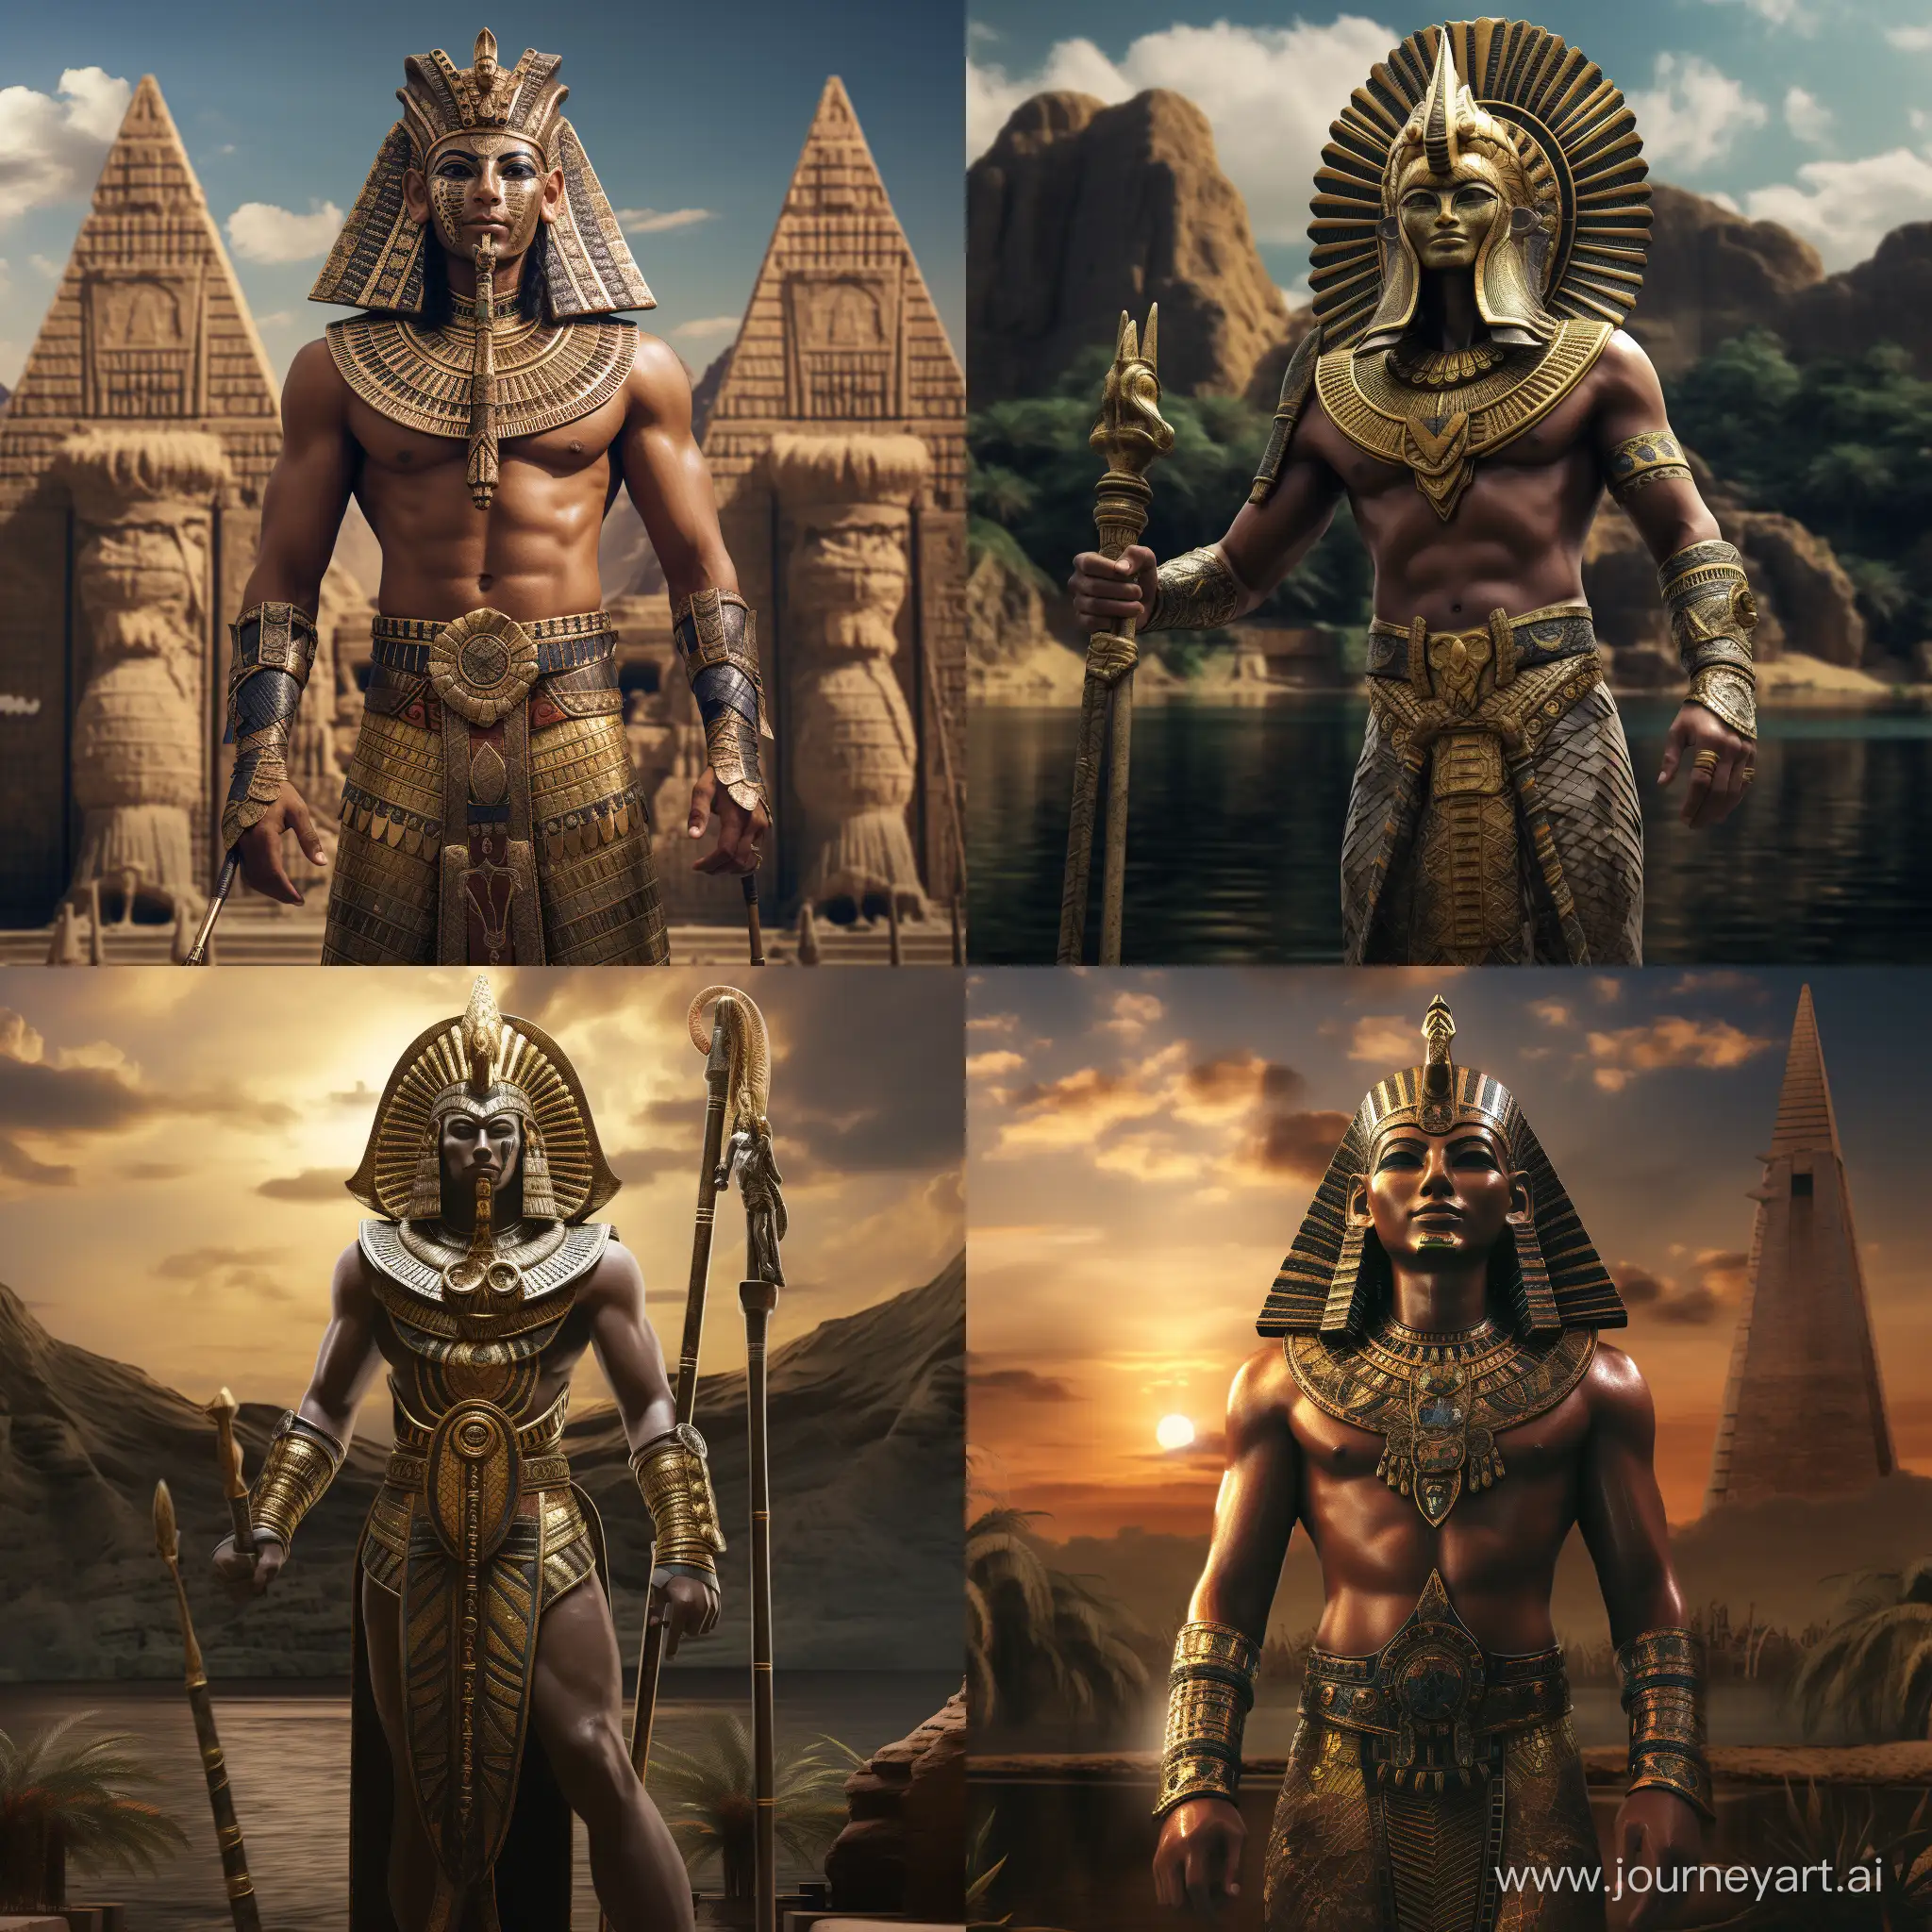 Majestic-Egyptian-God-Set-by-the-Nile-and-Pyramids